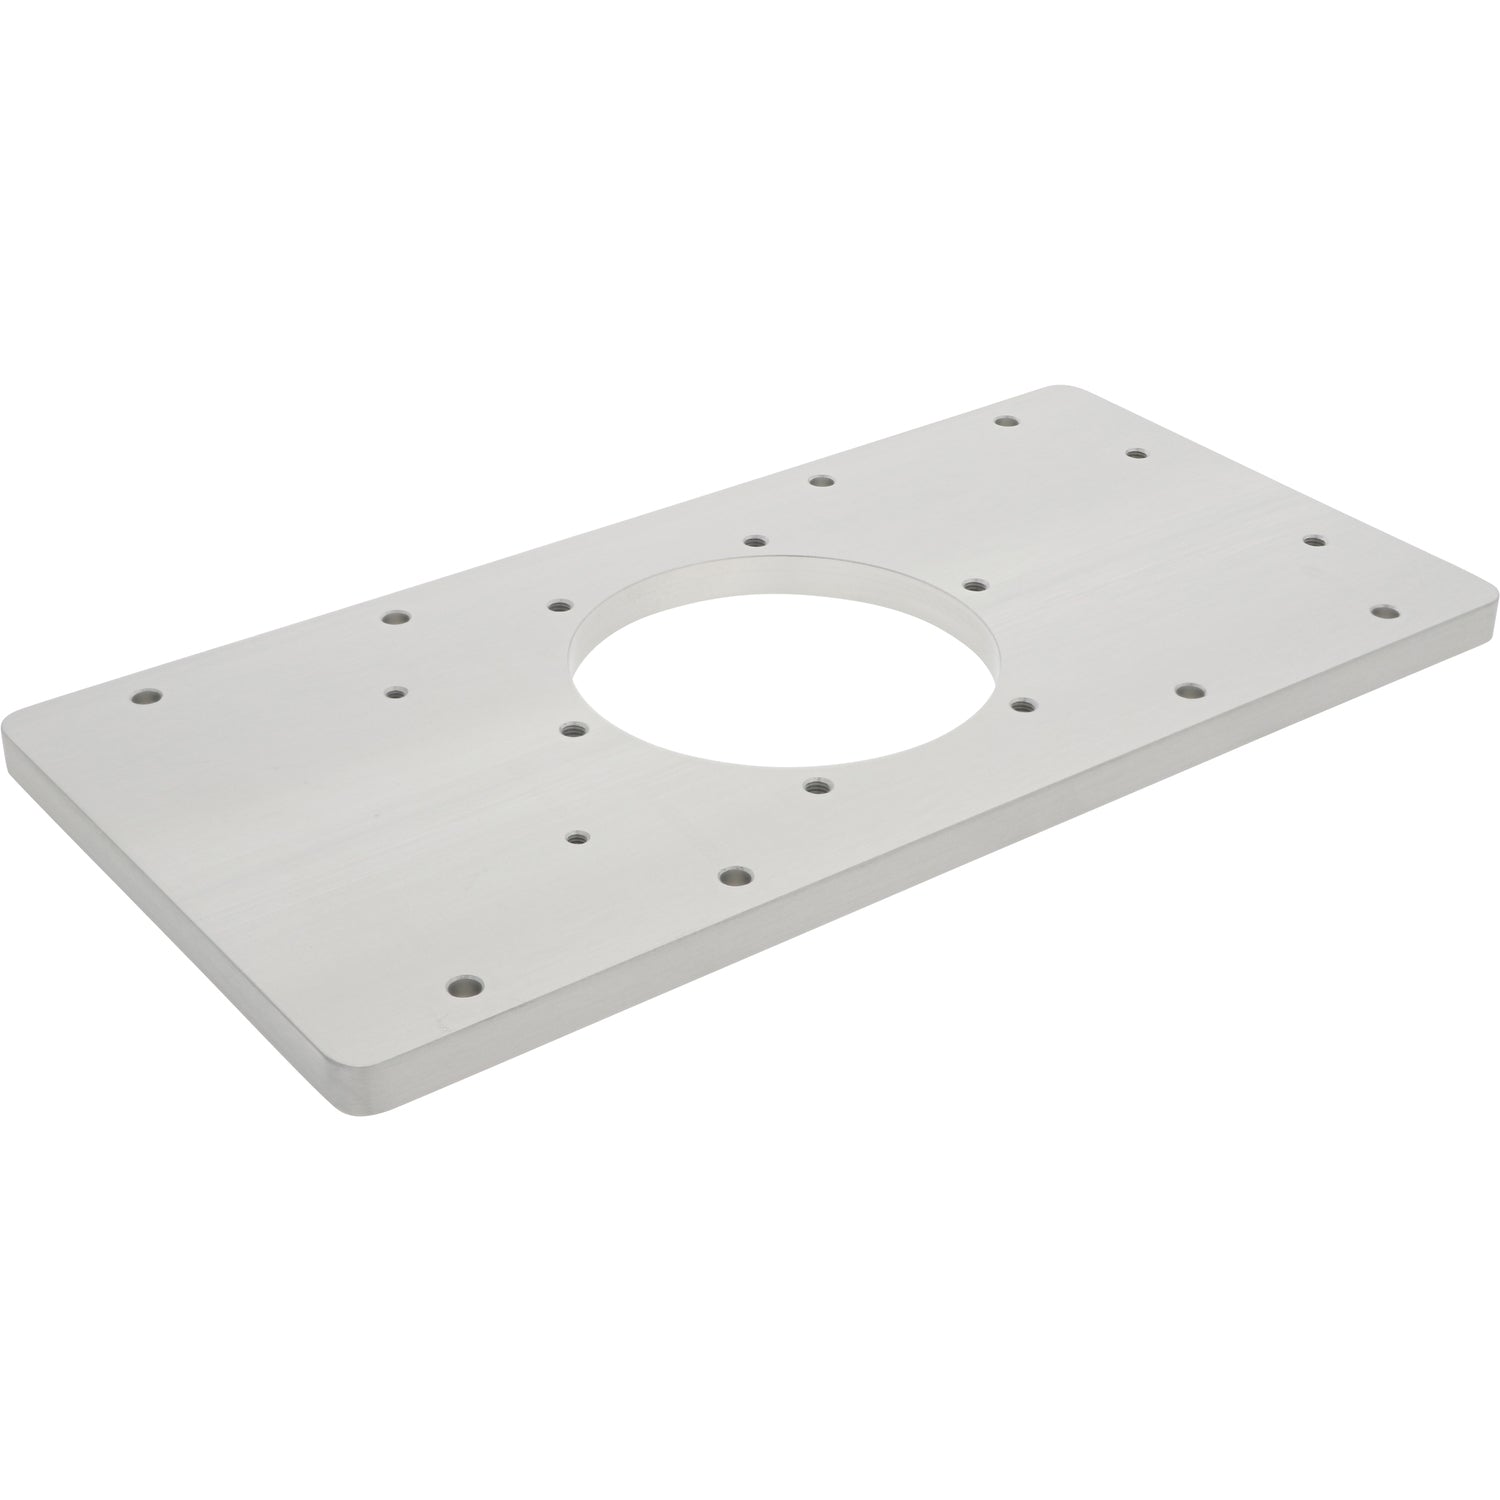 Flat, grey rectangular aluminum part with large center through hole and multiple smaller holes cut into part. Shown on white background. 